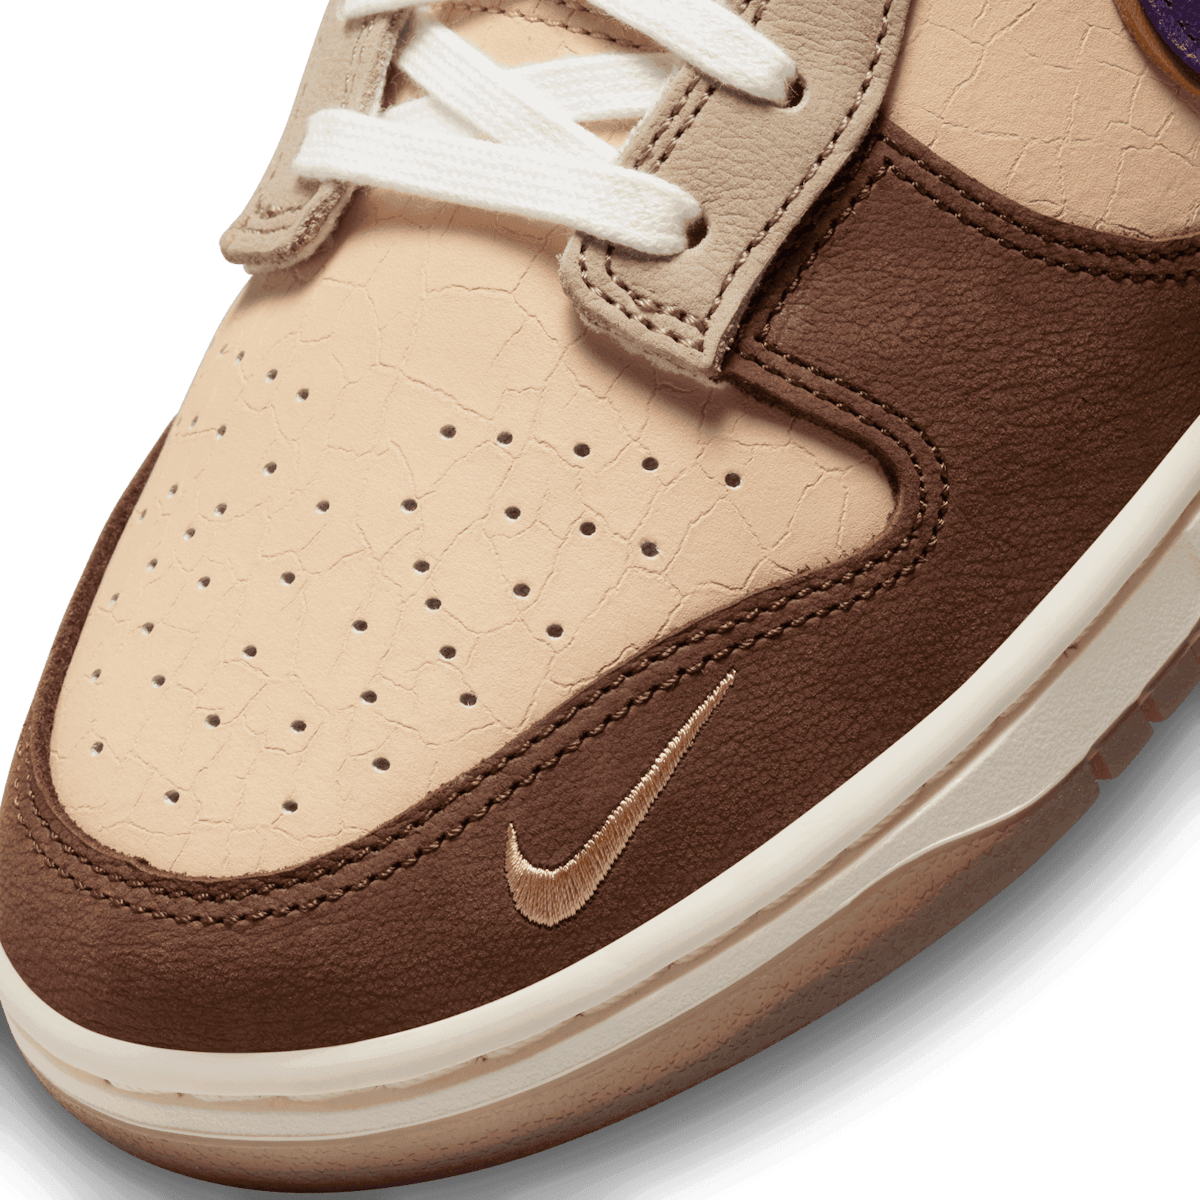 The NIke Dunk Low Setsubun Releases April 11th